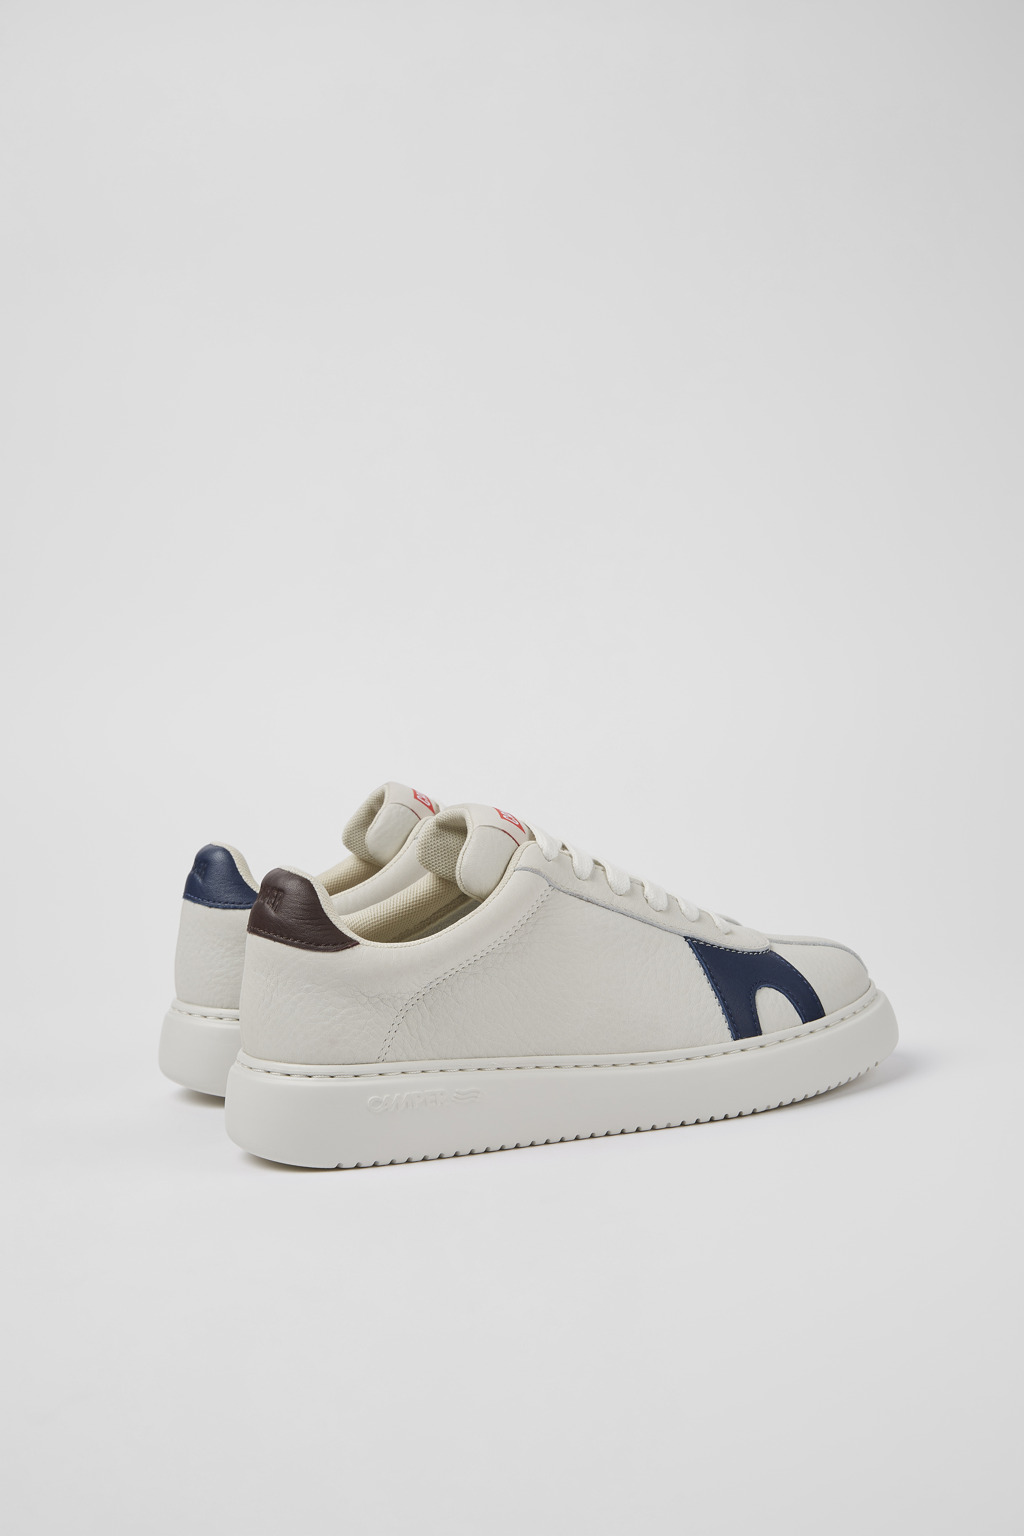 Twins White Sneakers for Women - Fall/Winter collection - Camper 